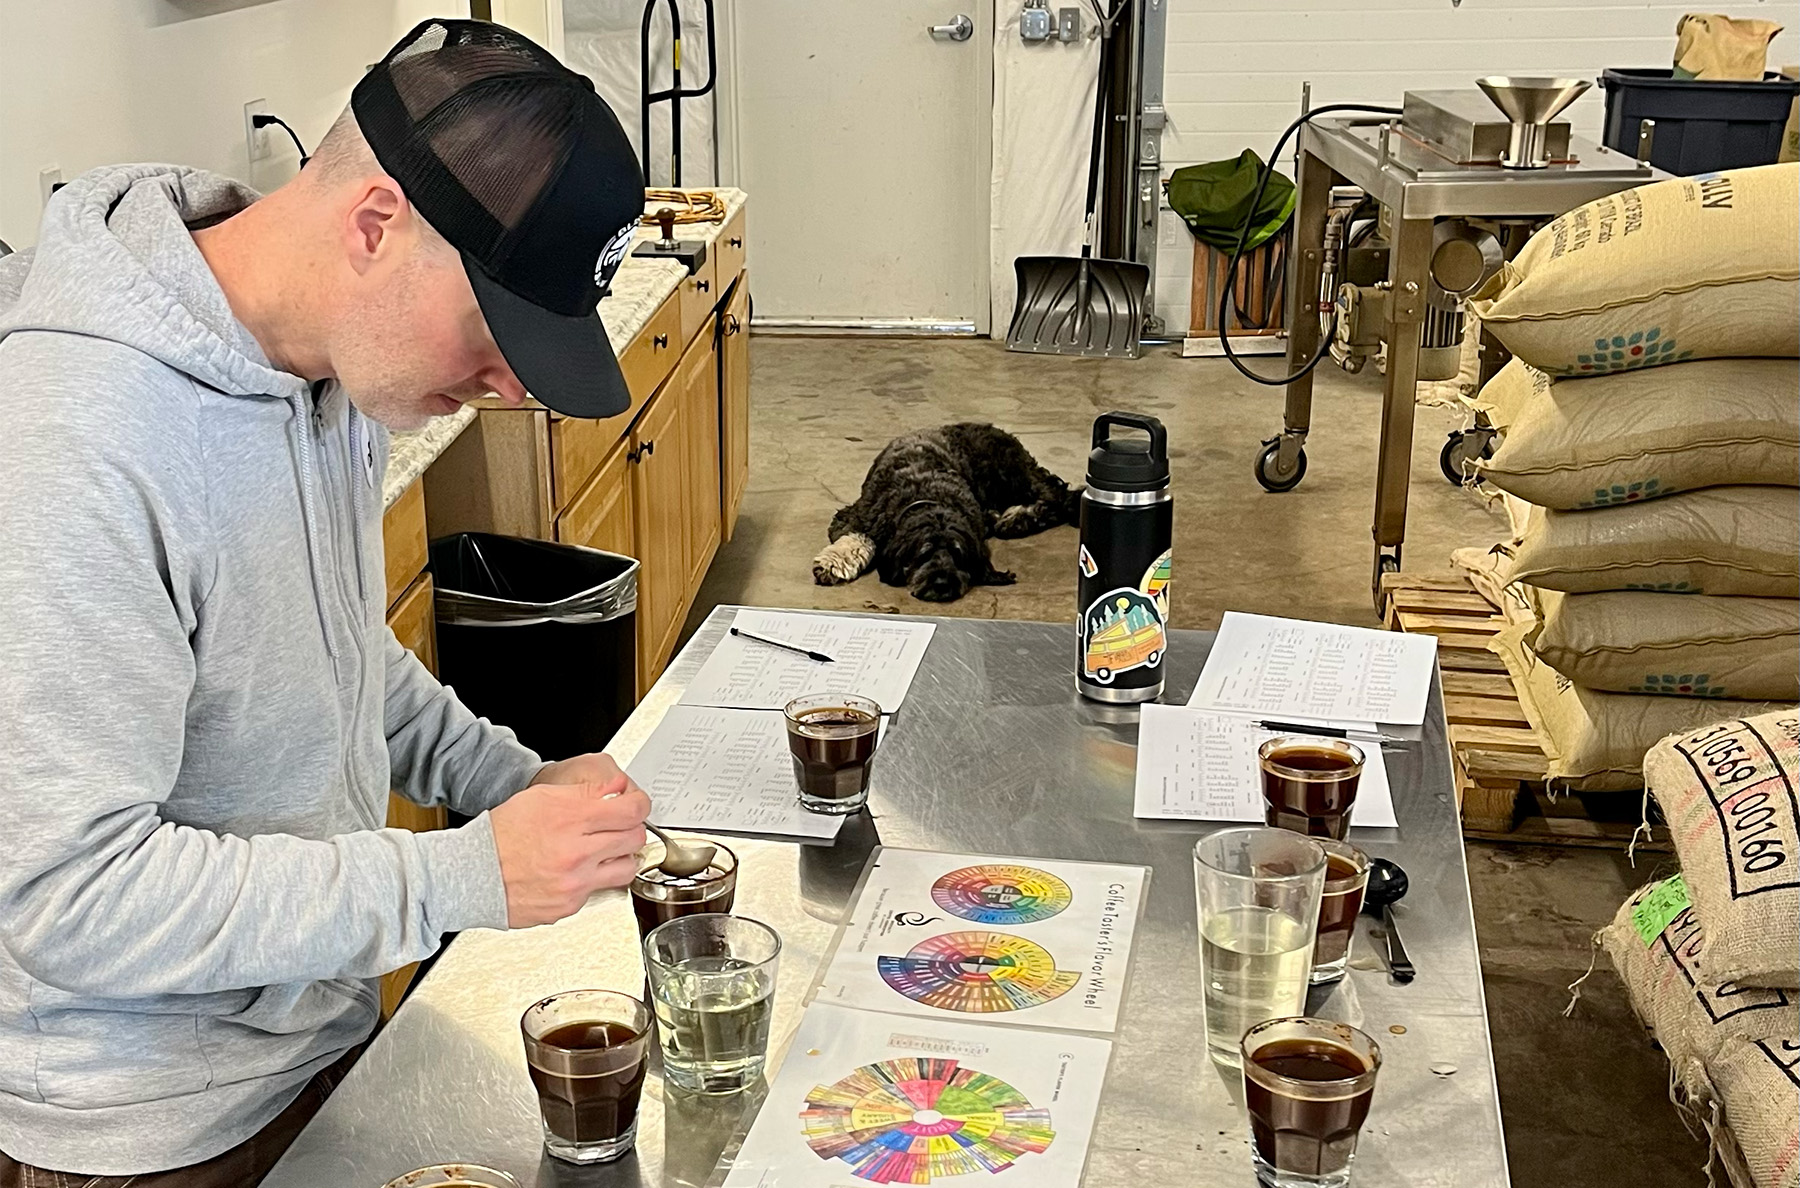 What’s the best way to make coffee? Strong opinions abound, and Jonathan is currently trying to figure out the right answer for himself. So in part 2 of our CRAFTED podcast series, Sam Higby, co-owner of First Ascent Coffee Roasters, joins Jonathan to talk pour overs, grinders, brewing at altitude, programmability, and more. Listen up, then let us know what your pick is for the best coffee-making setup out there.